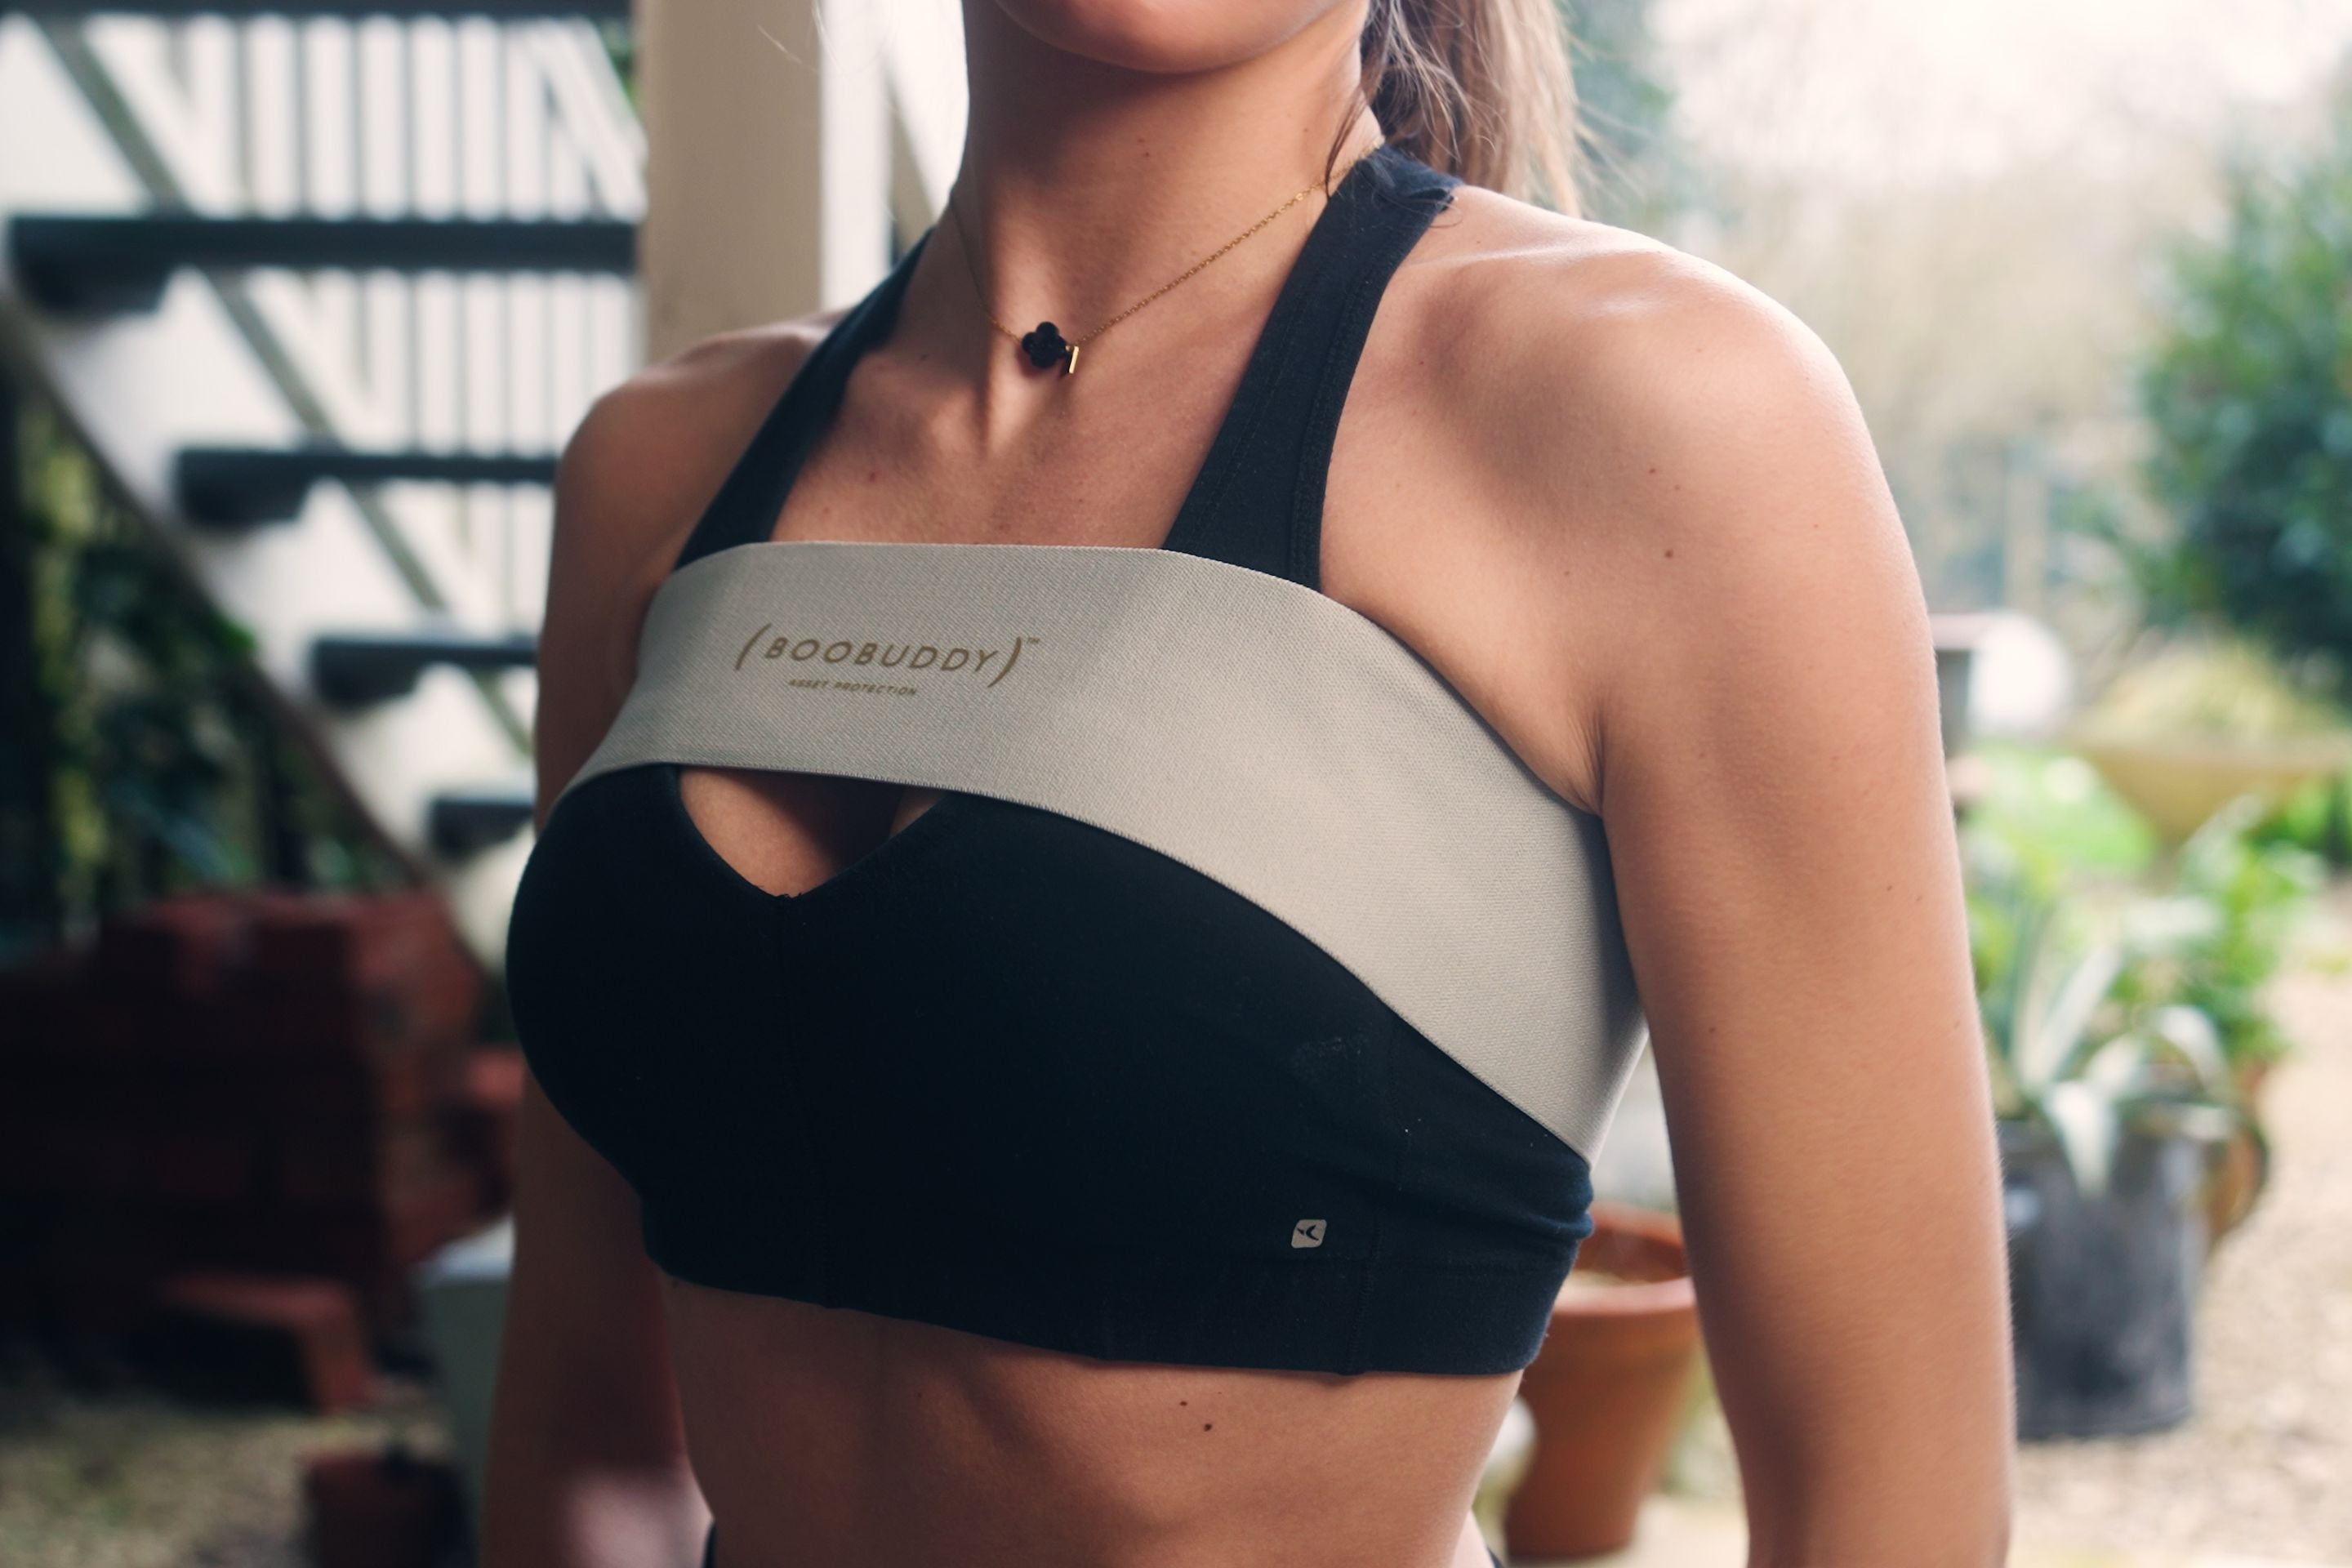 Ghelonadi Women's Breast Support Band No-Swing Adjustable Sports Bra Band  for Post-Surgery Knee Support - Buy Ghelonadi Women's Breast Support Band  No-Swing Adjustable Sports Bra Band for Post-Surgery Knee Support Online at